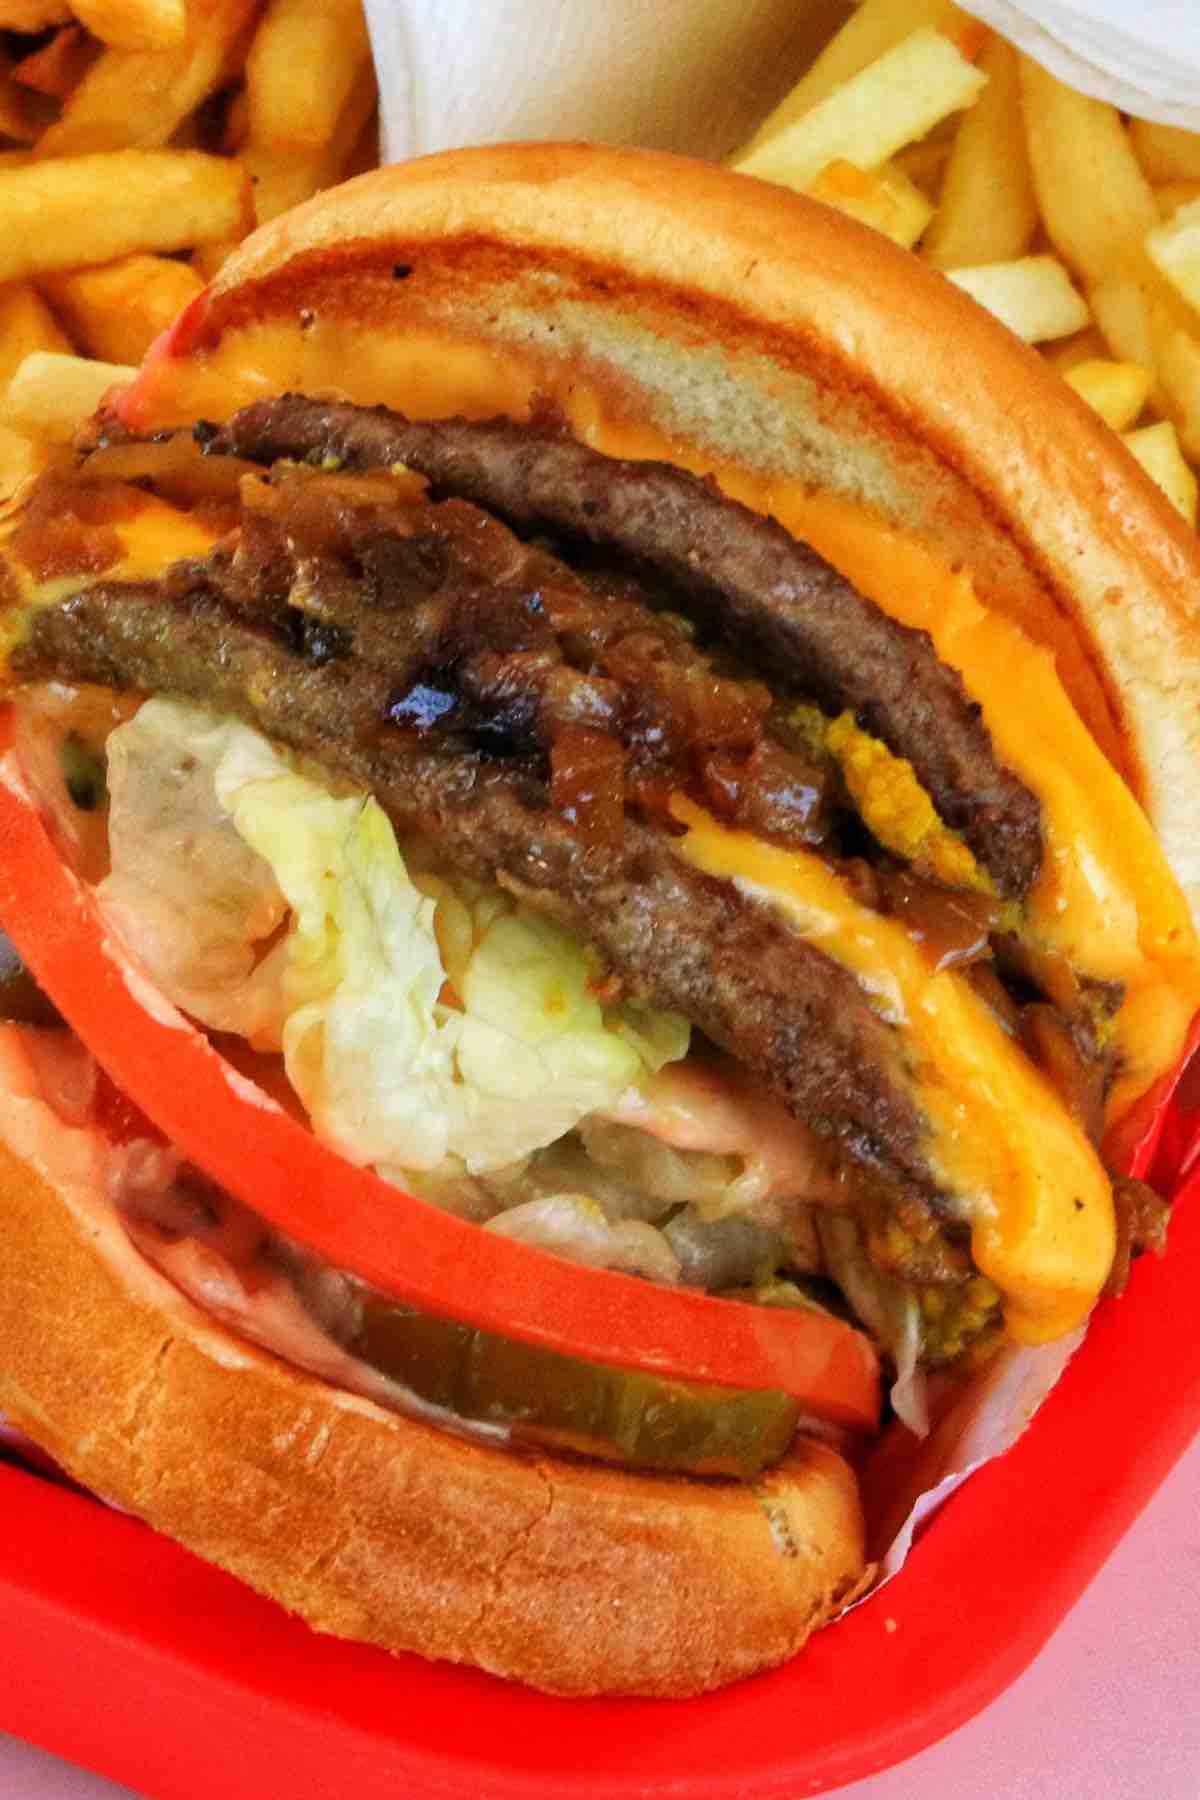 This isn’t your everyday burger! The Animal Style Burger is a popular menu item at the In-N-Out chain of restaurants. If you’ve never tried the in-n-out burger yet, you’re seriously missing out! In this post you’ll learn what exactly is Animal Style and how to make this delicious burger perfectly at home.